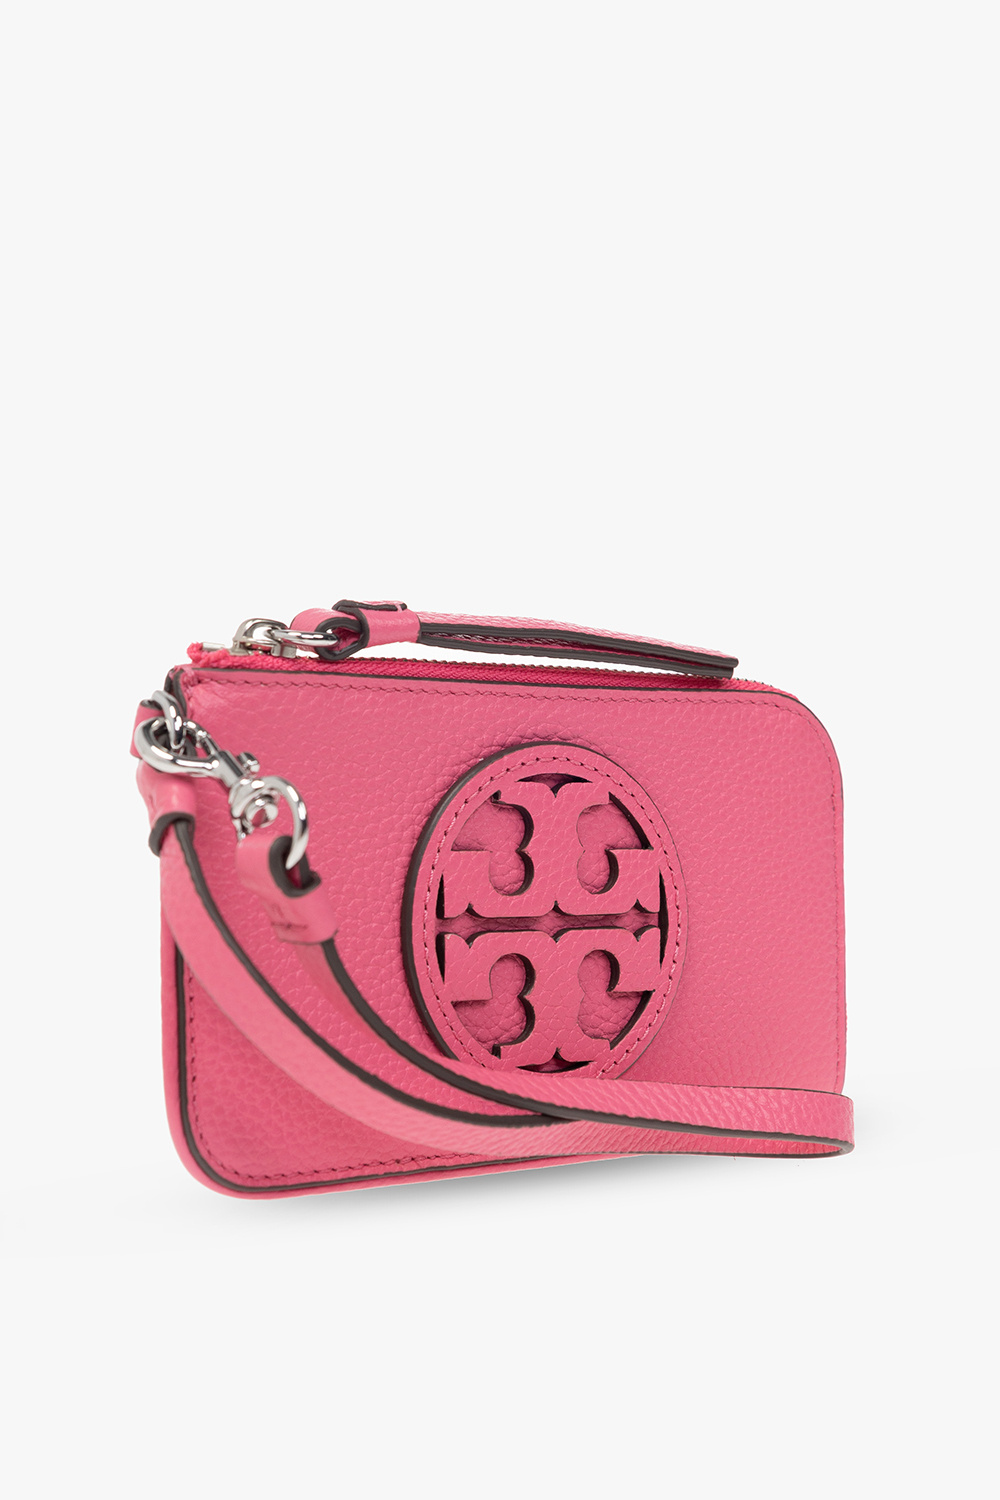 Tory Burch Card holder with strap | Women's Accessories | Vitkac